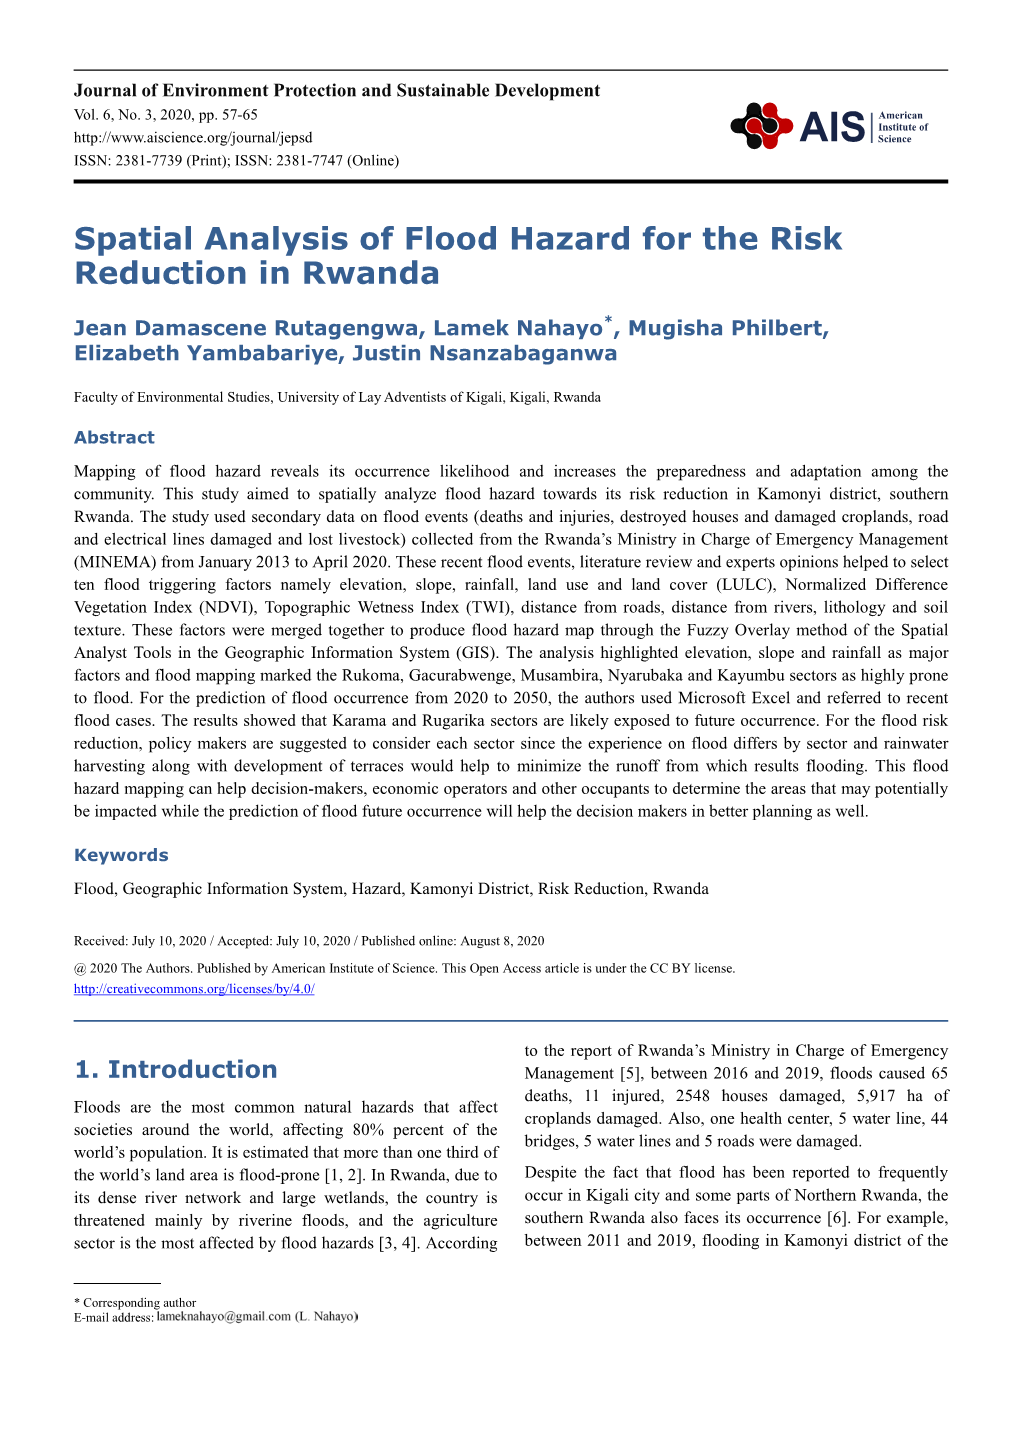 Spatial Analysis of Flood Hazard for the Risk Reduction in Rwanda